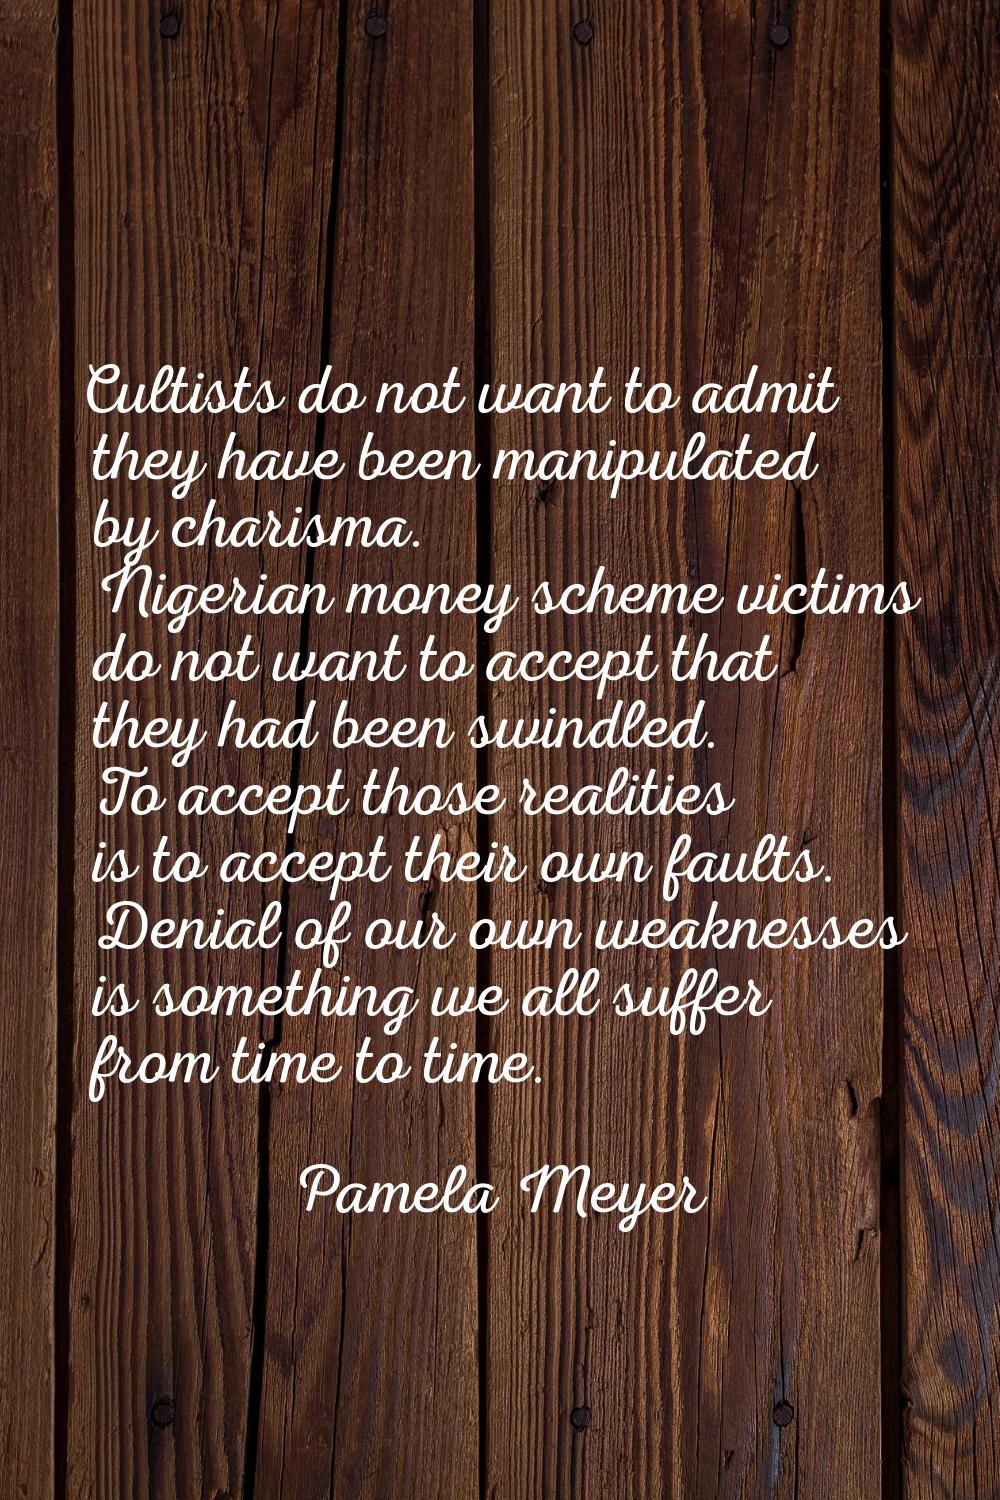 Cultists do not want to admit they have been manipulated by charisma. Nigerian money scheme victims